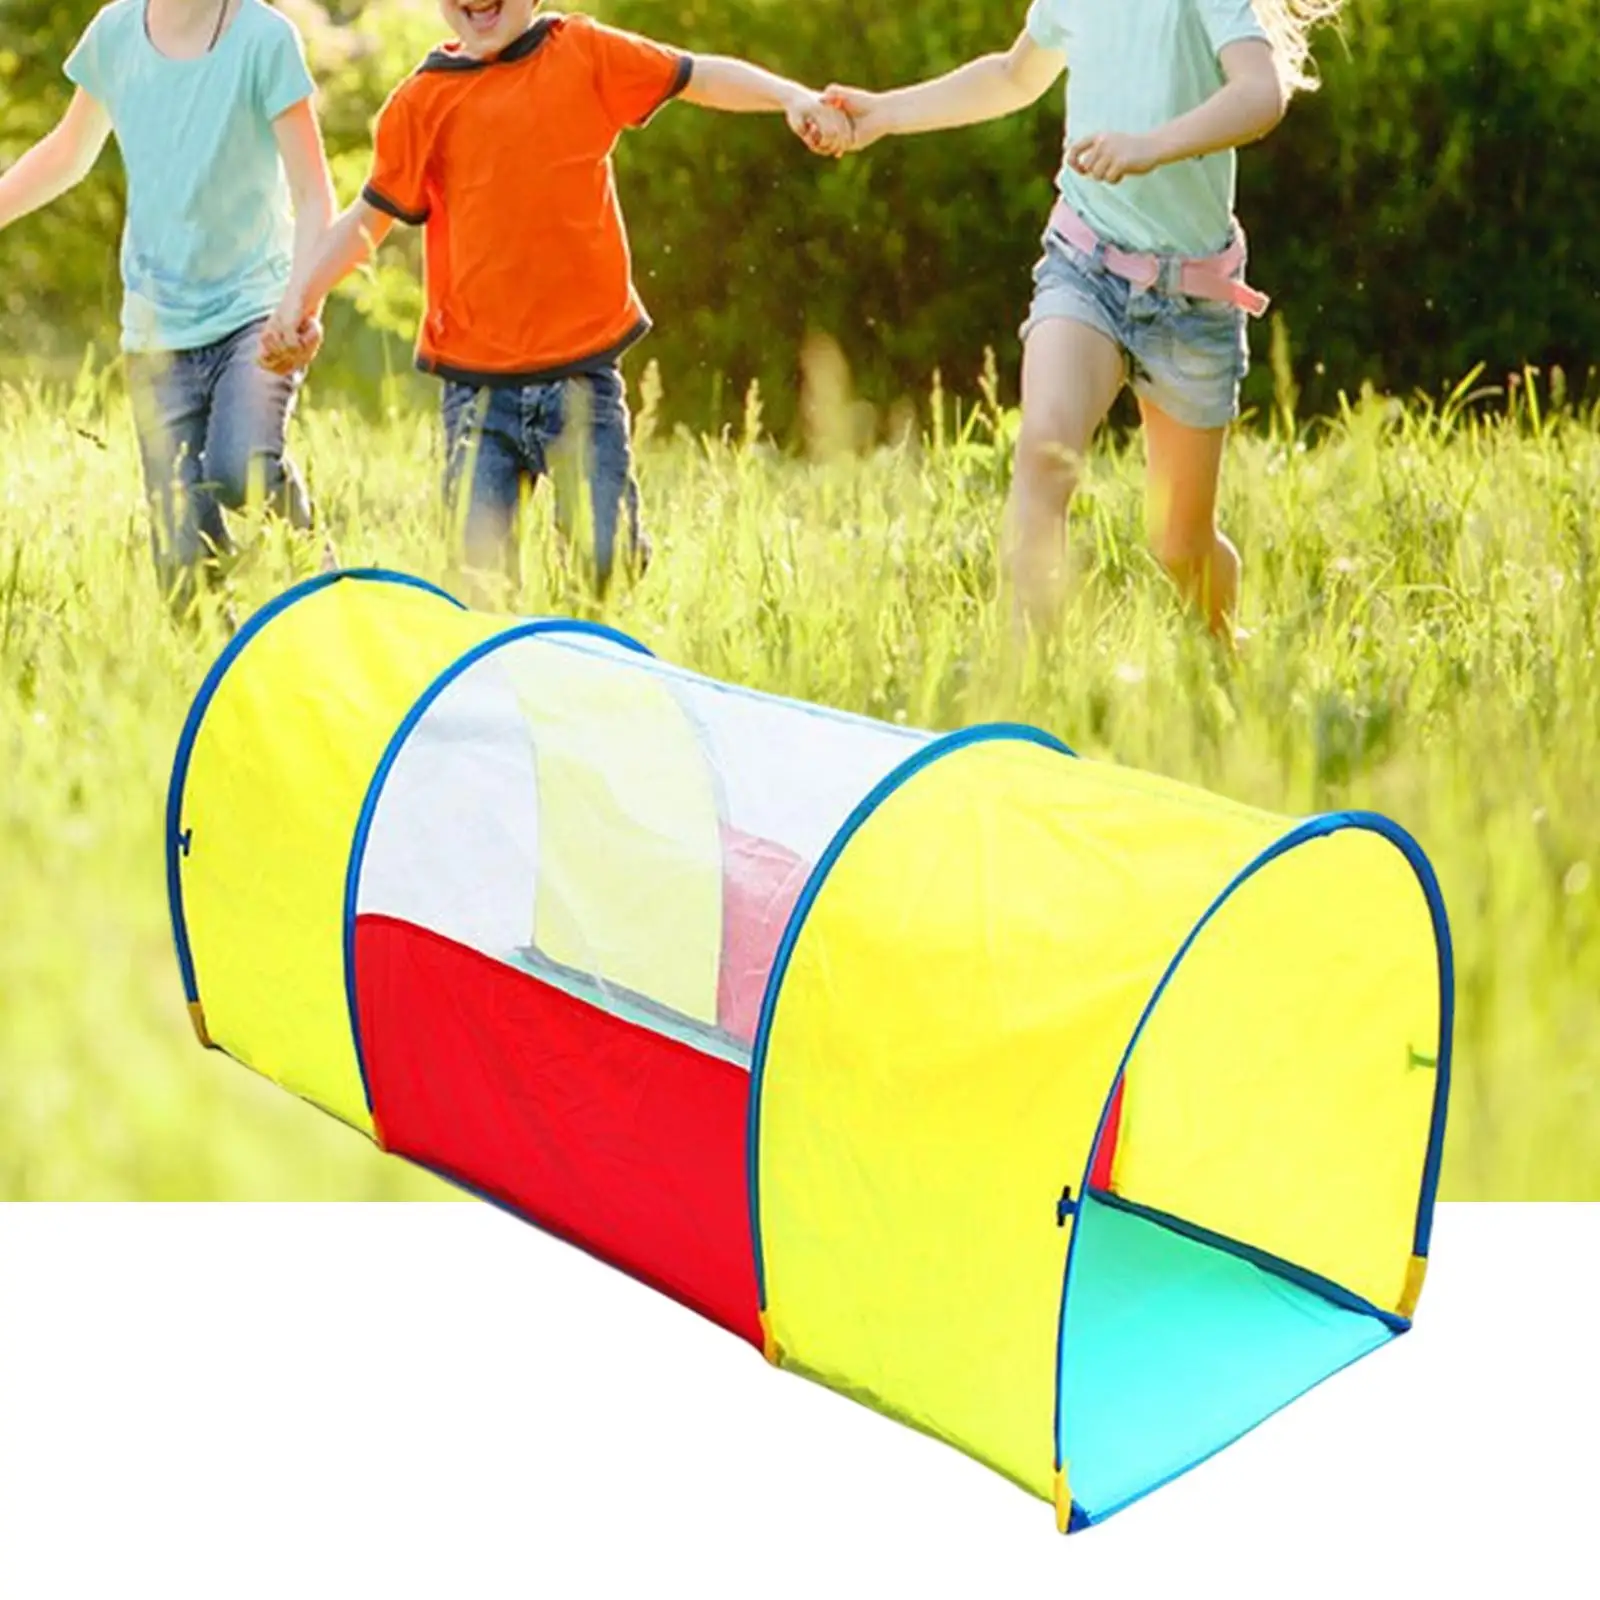 Portable Kids Play Tunnel Tent Indoor Outdoor Toy Backyard Playset for Girls